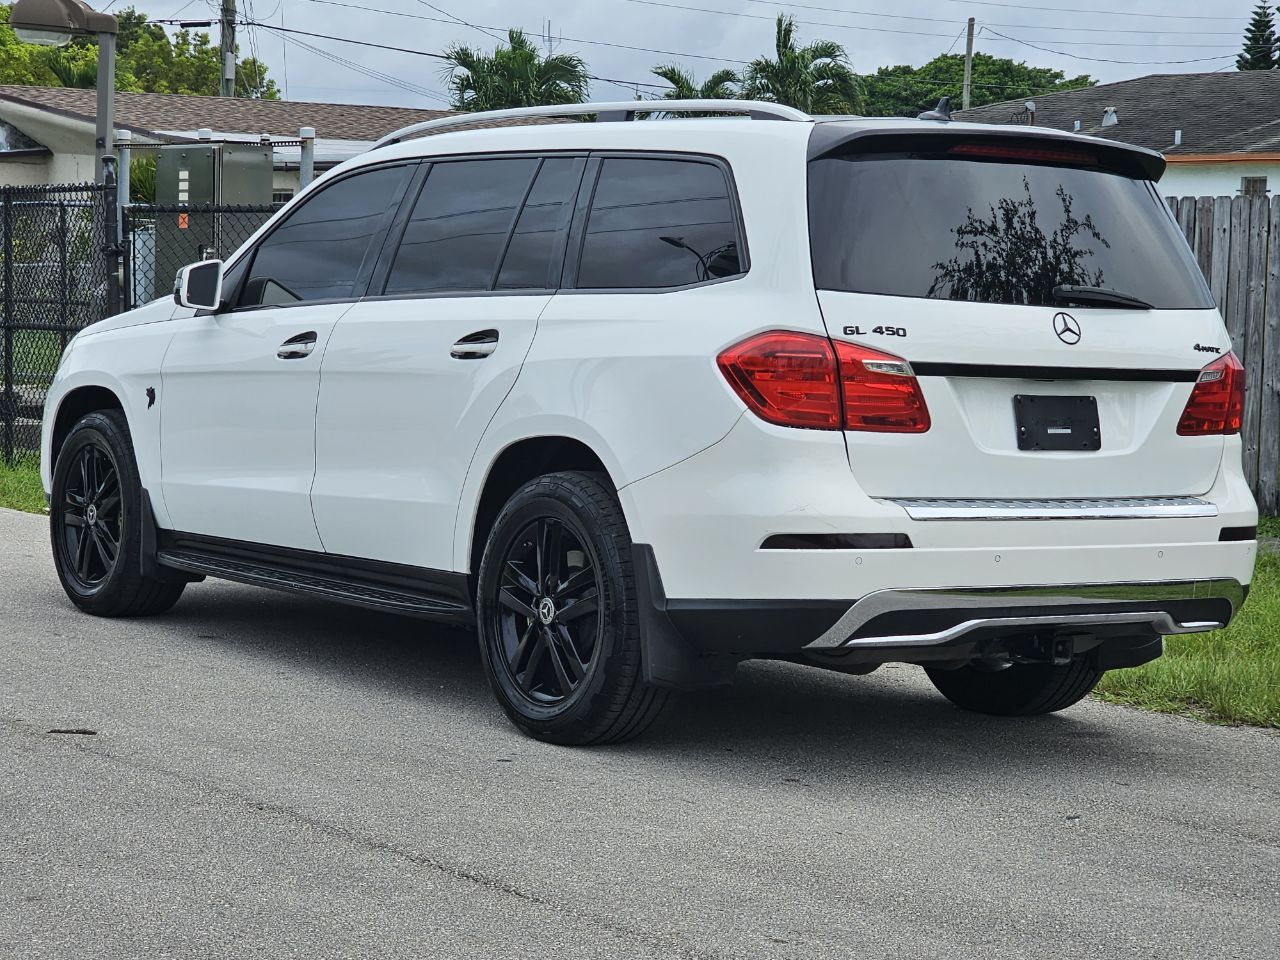 2015 MERCEDES-BENZ GL-Class SUV / Crossover - $13,845